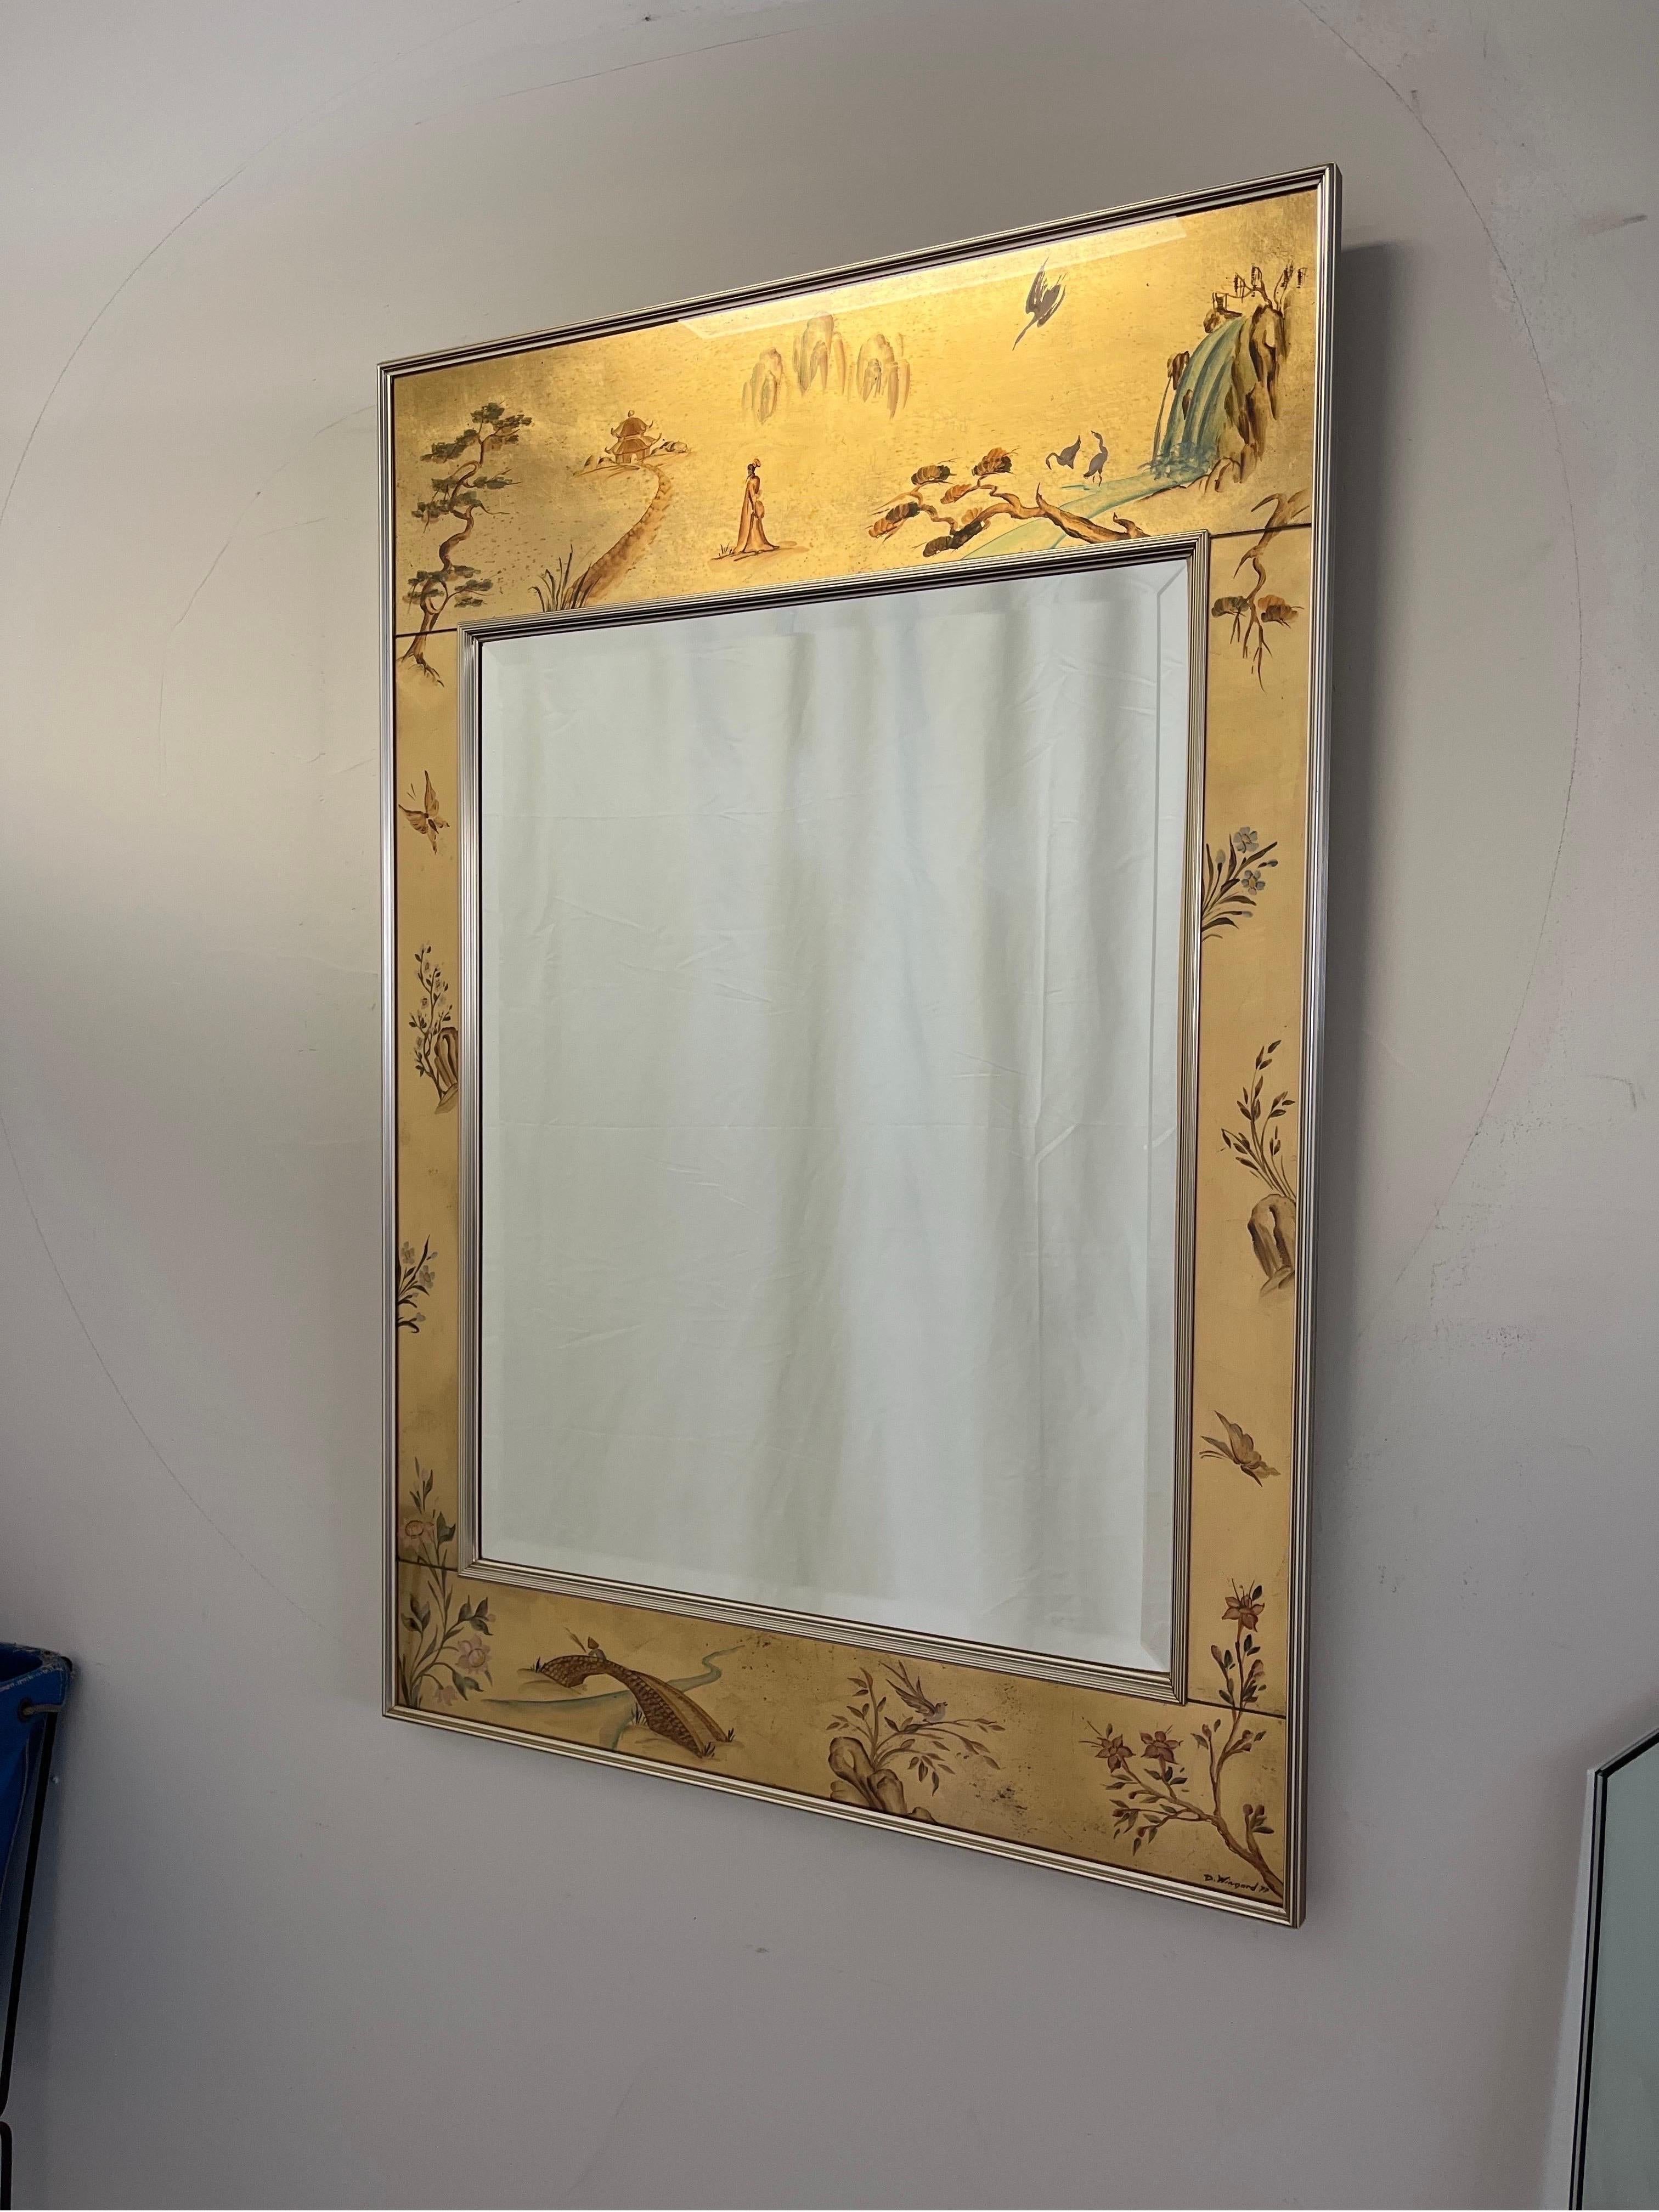 La Barge hand painted mirror frame depicts Asian flora and fauna. Chrome anodized aluminum gallery style surround. Signed and dated by the artist, K. Scheibach, 77.
Curbside to NYC/Philly $300